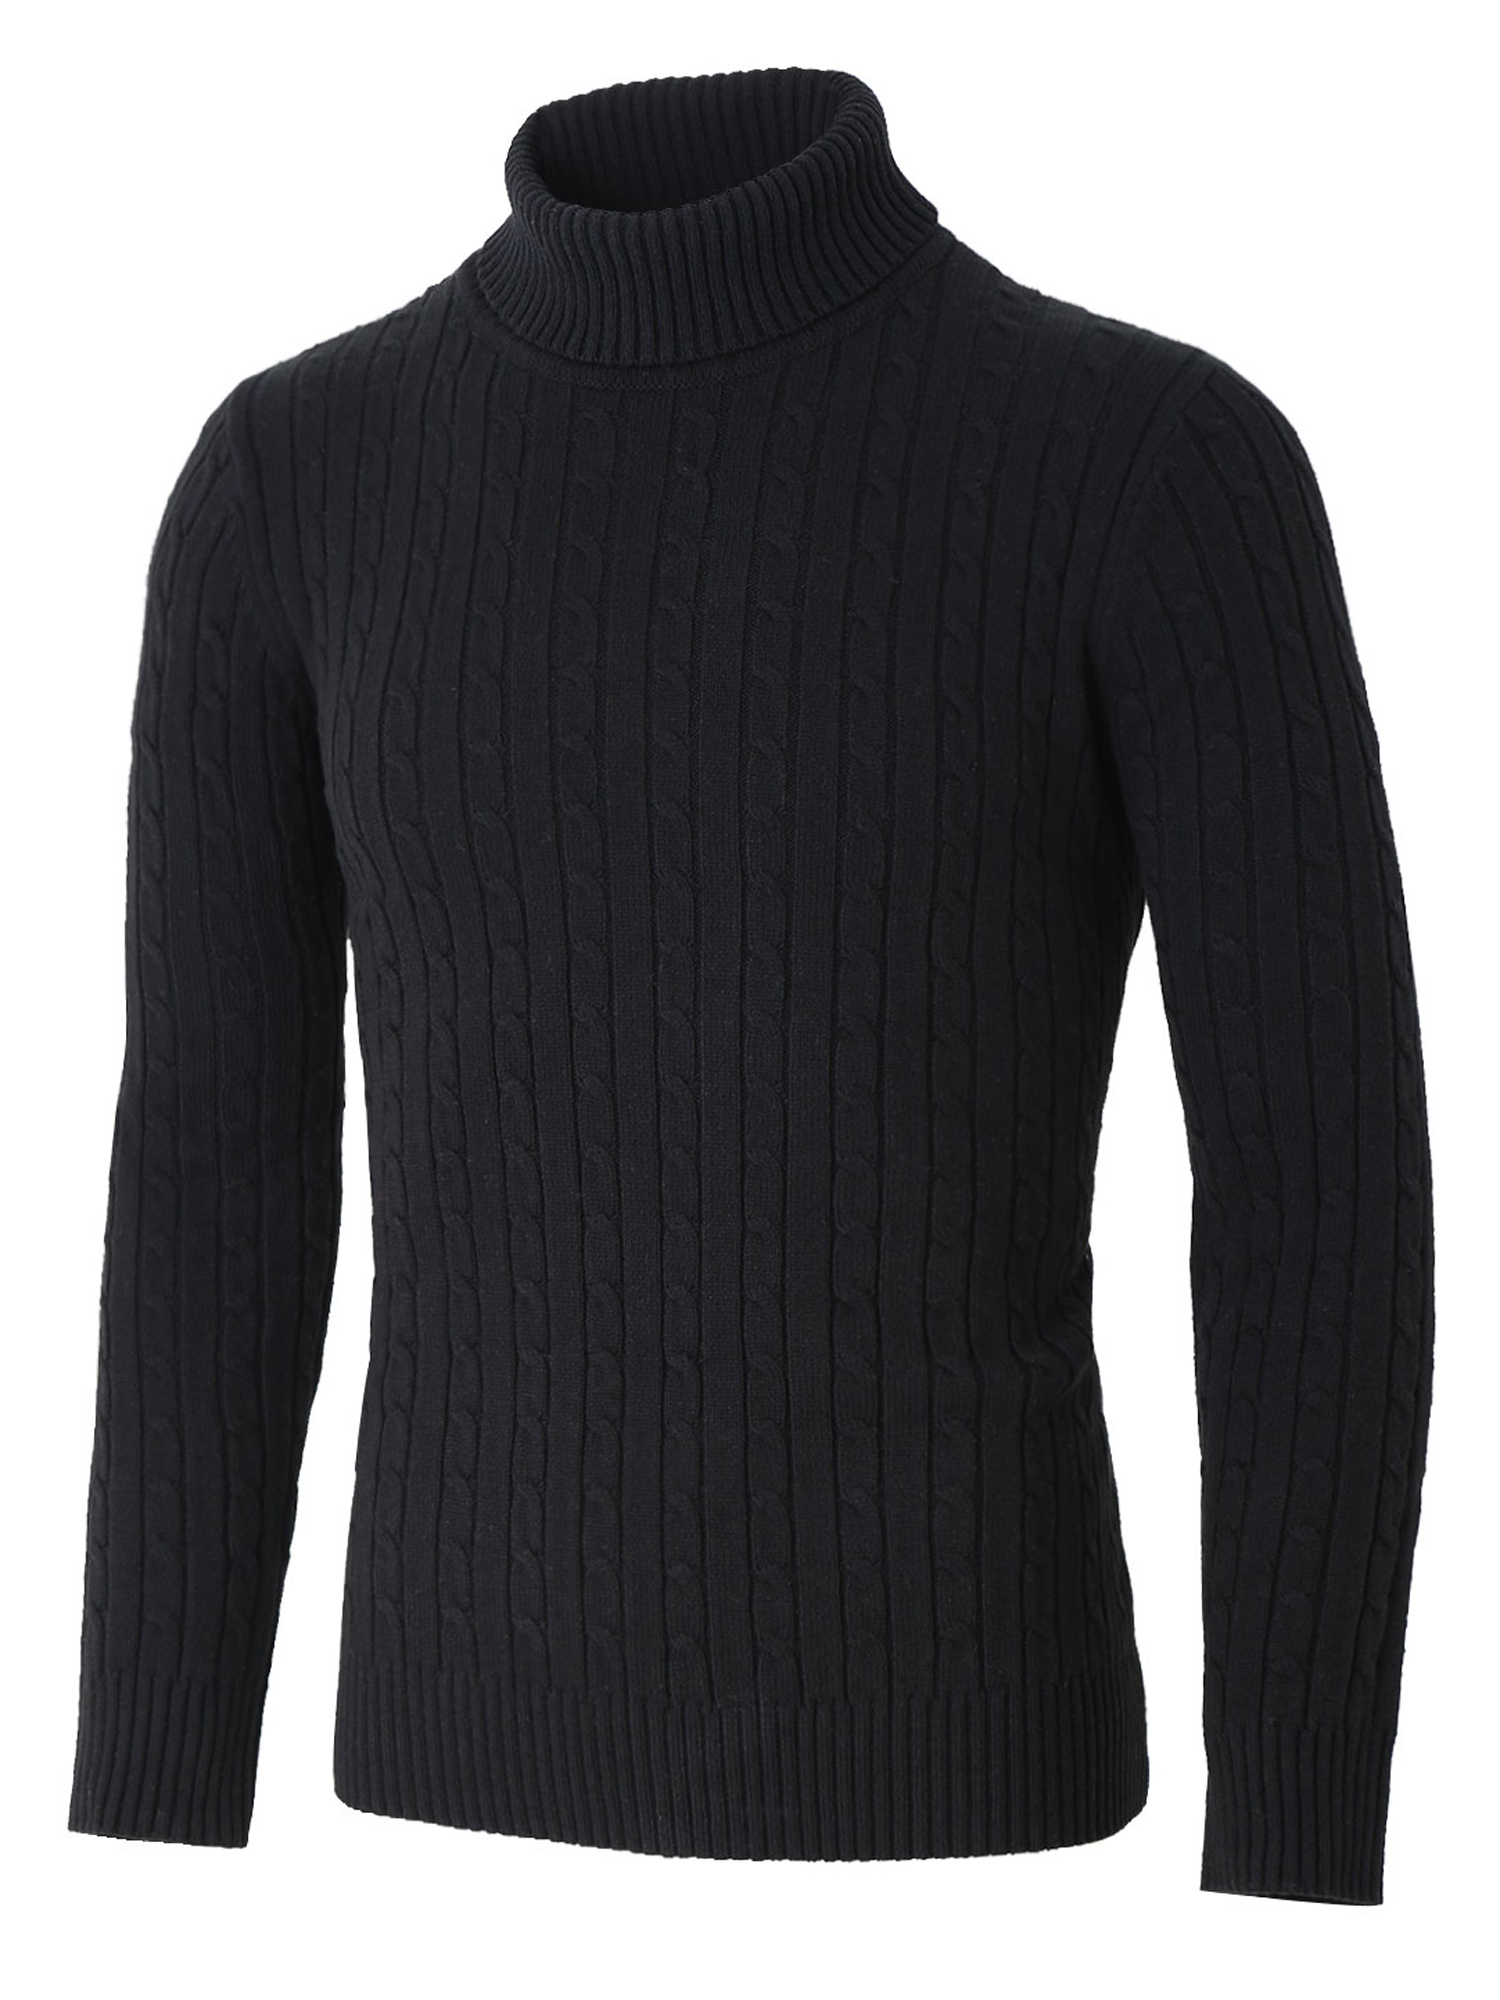 Men's Turtleneck Long Sleeves Pullover Cable Knit Sweater - image 1 of 7